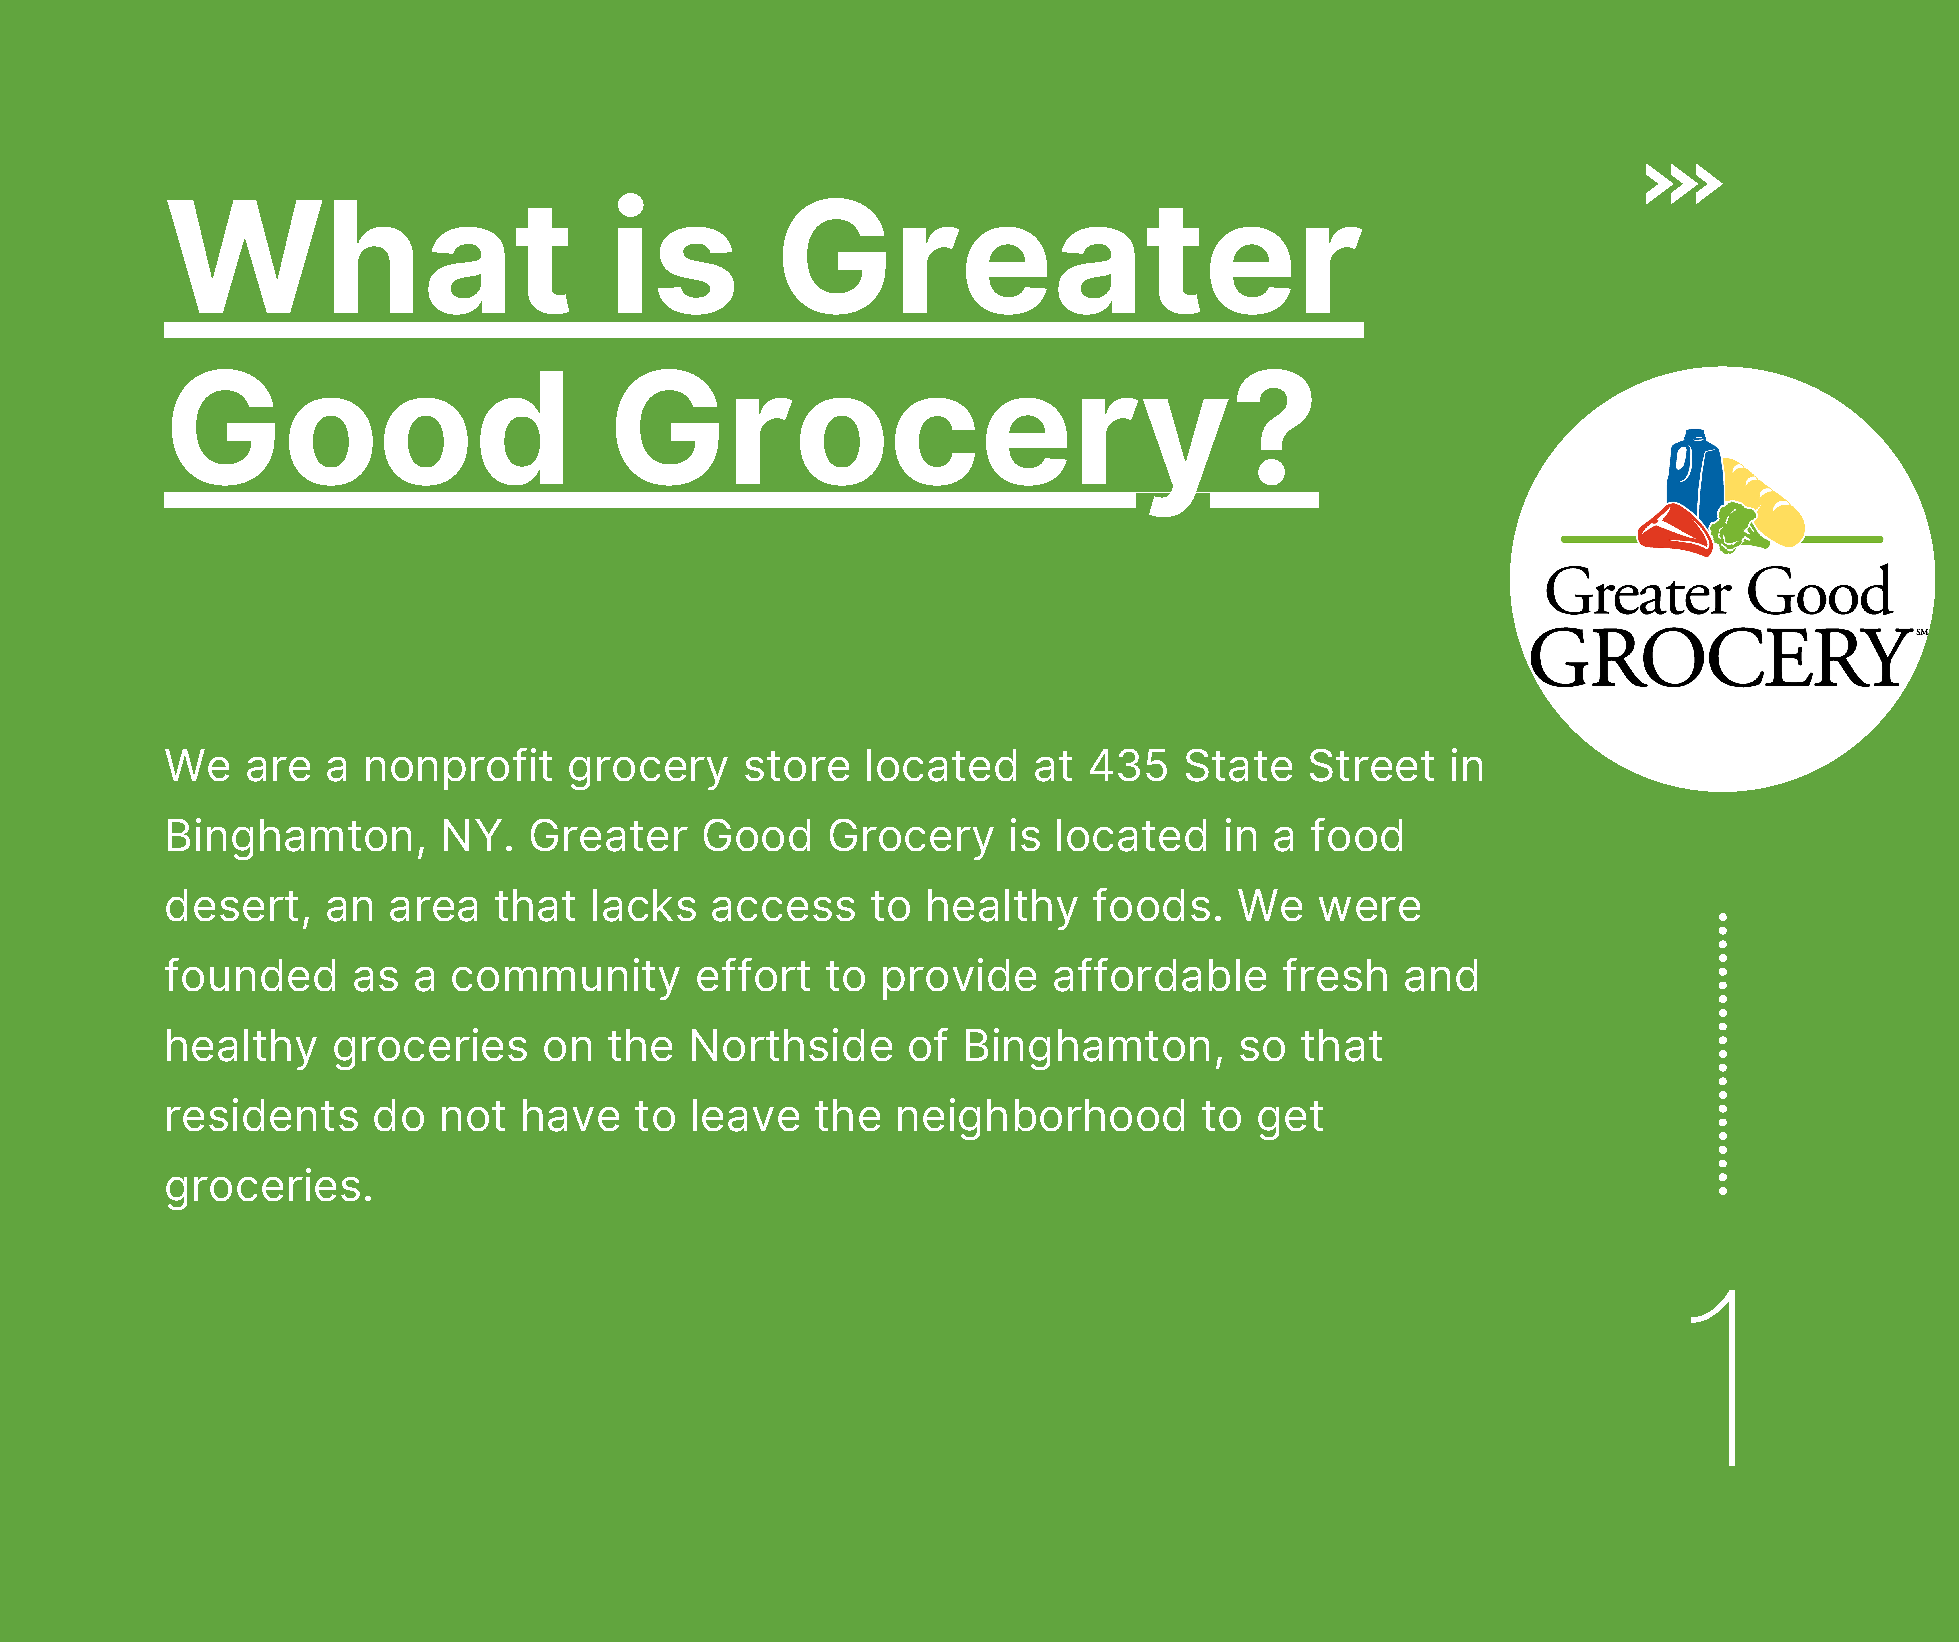 Greater Good Grocery